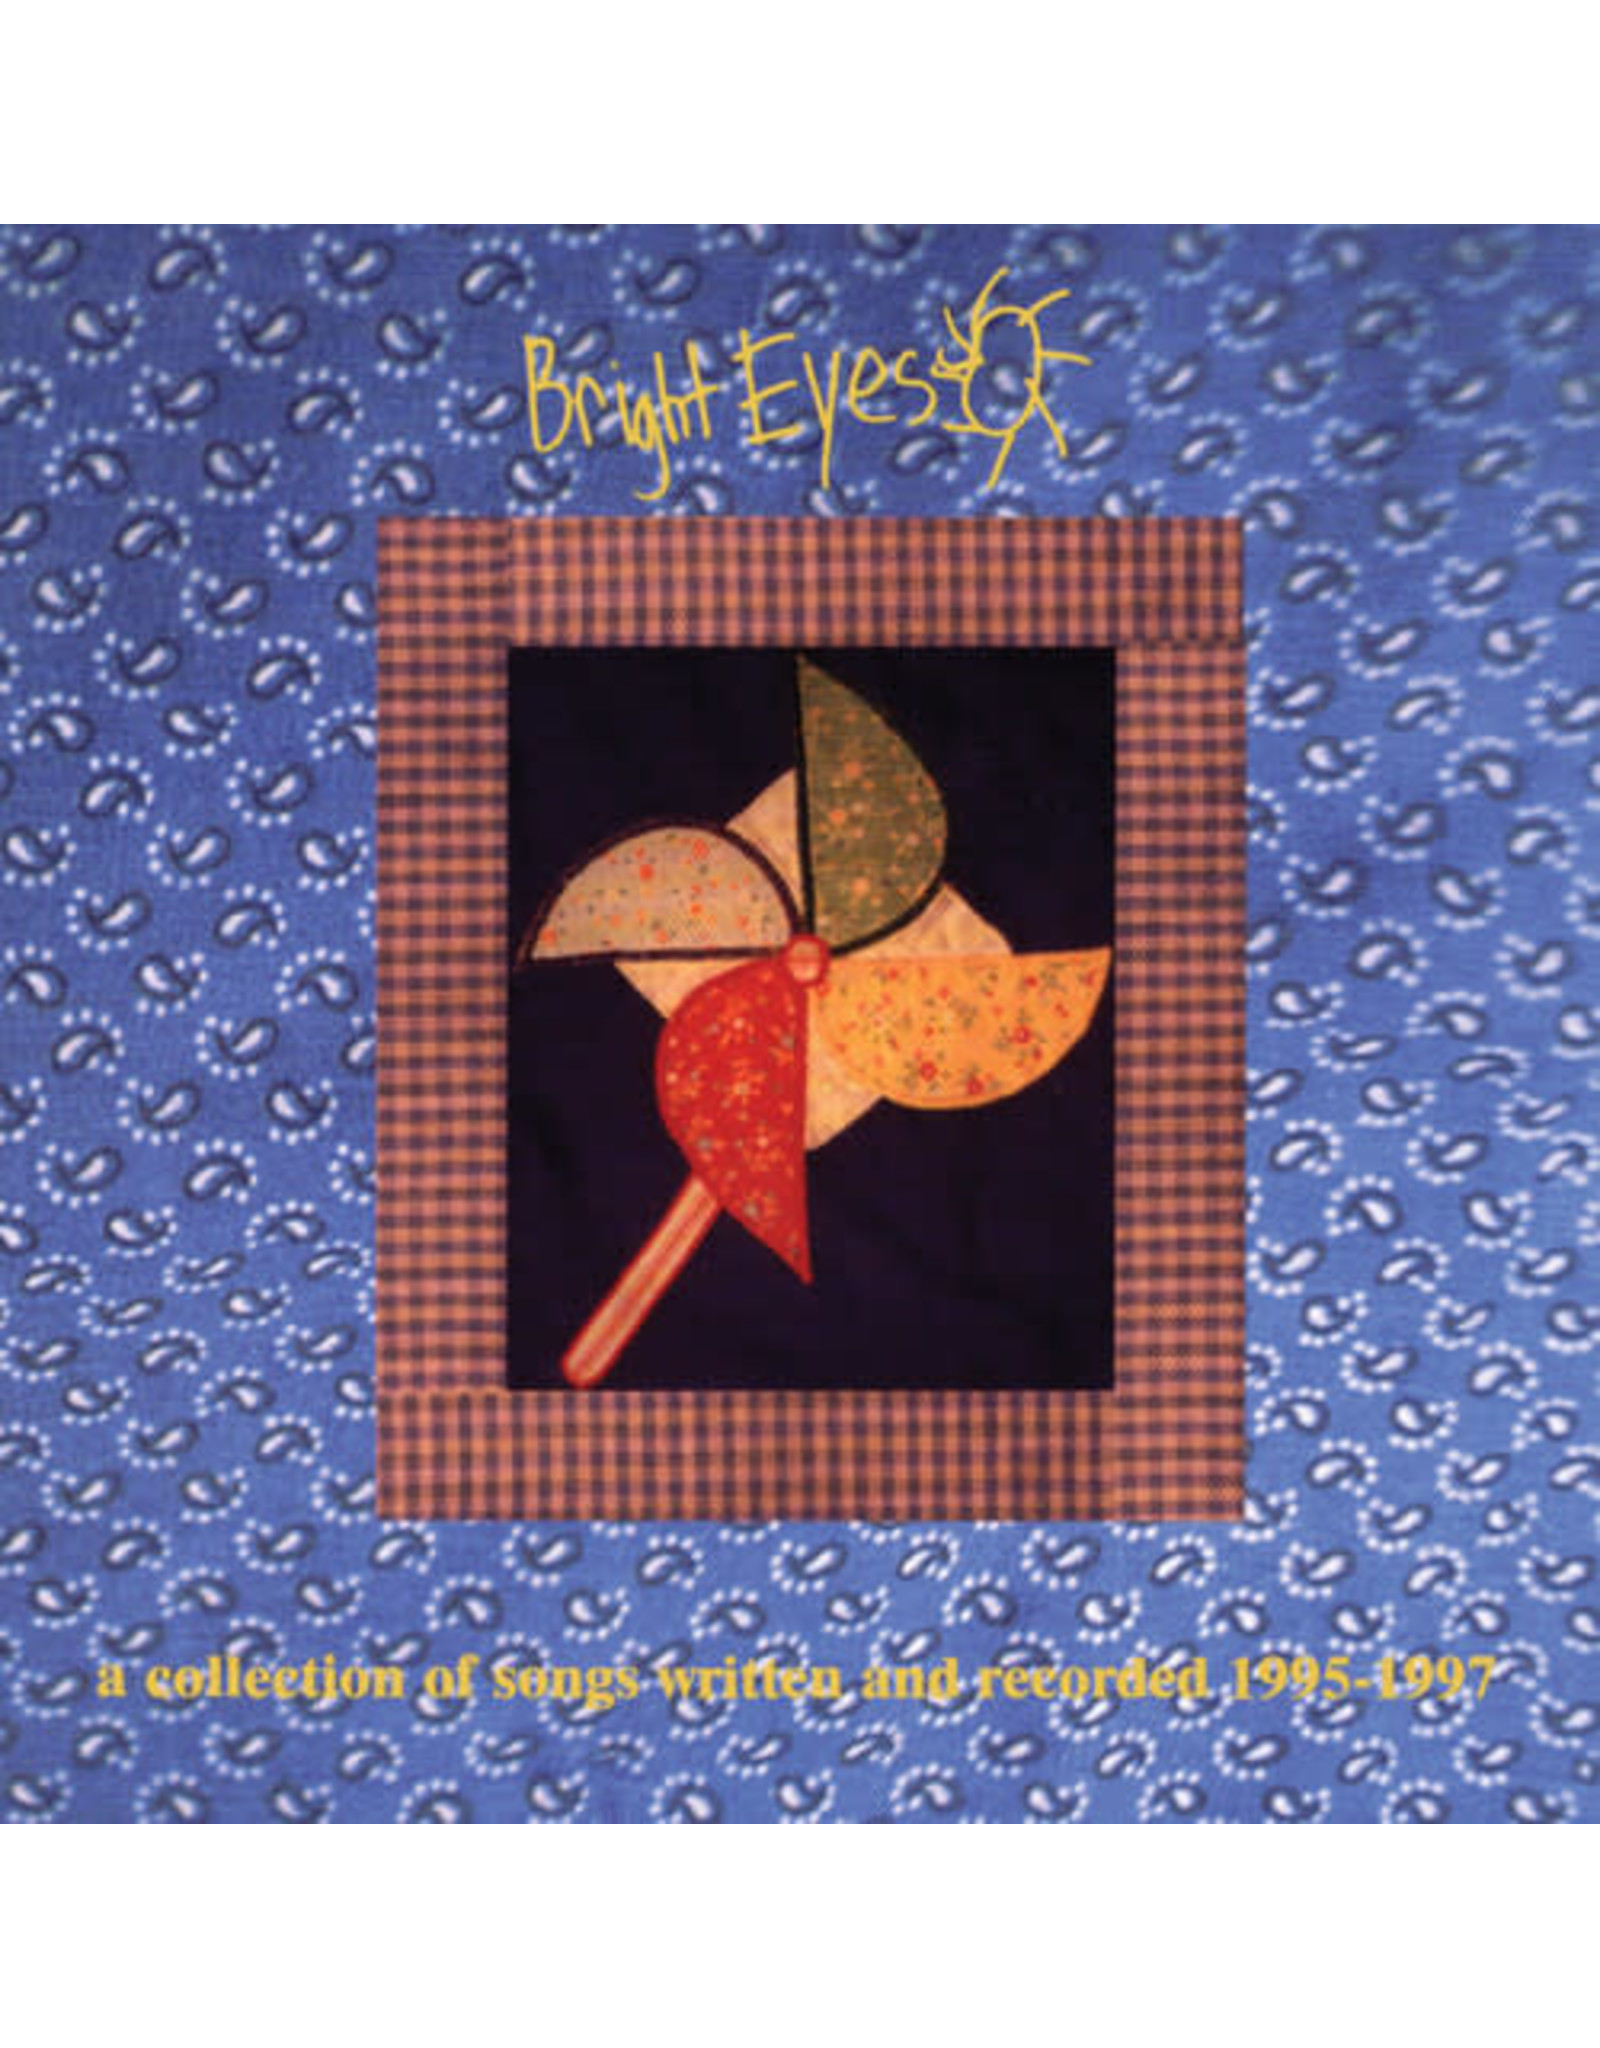 New Vinyl Bright Eyes -  Collection Of Songs Written And Recorded 1995-1997 2LP